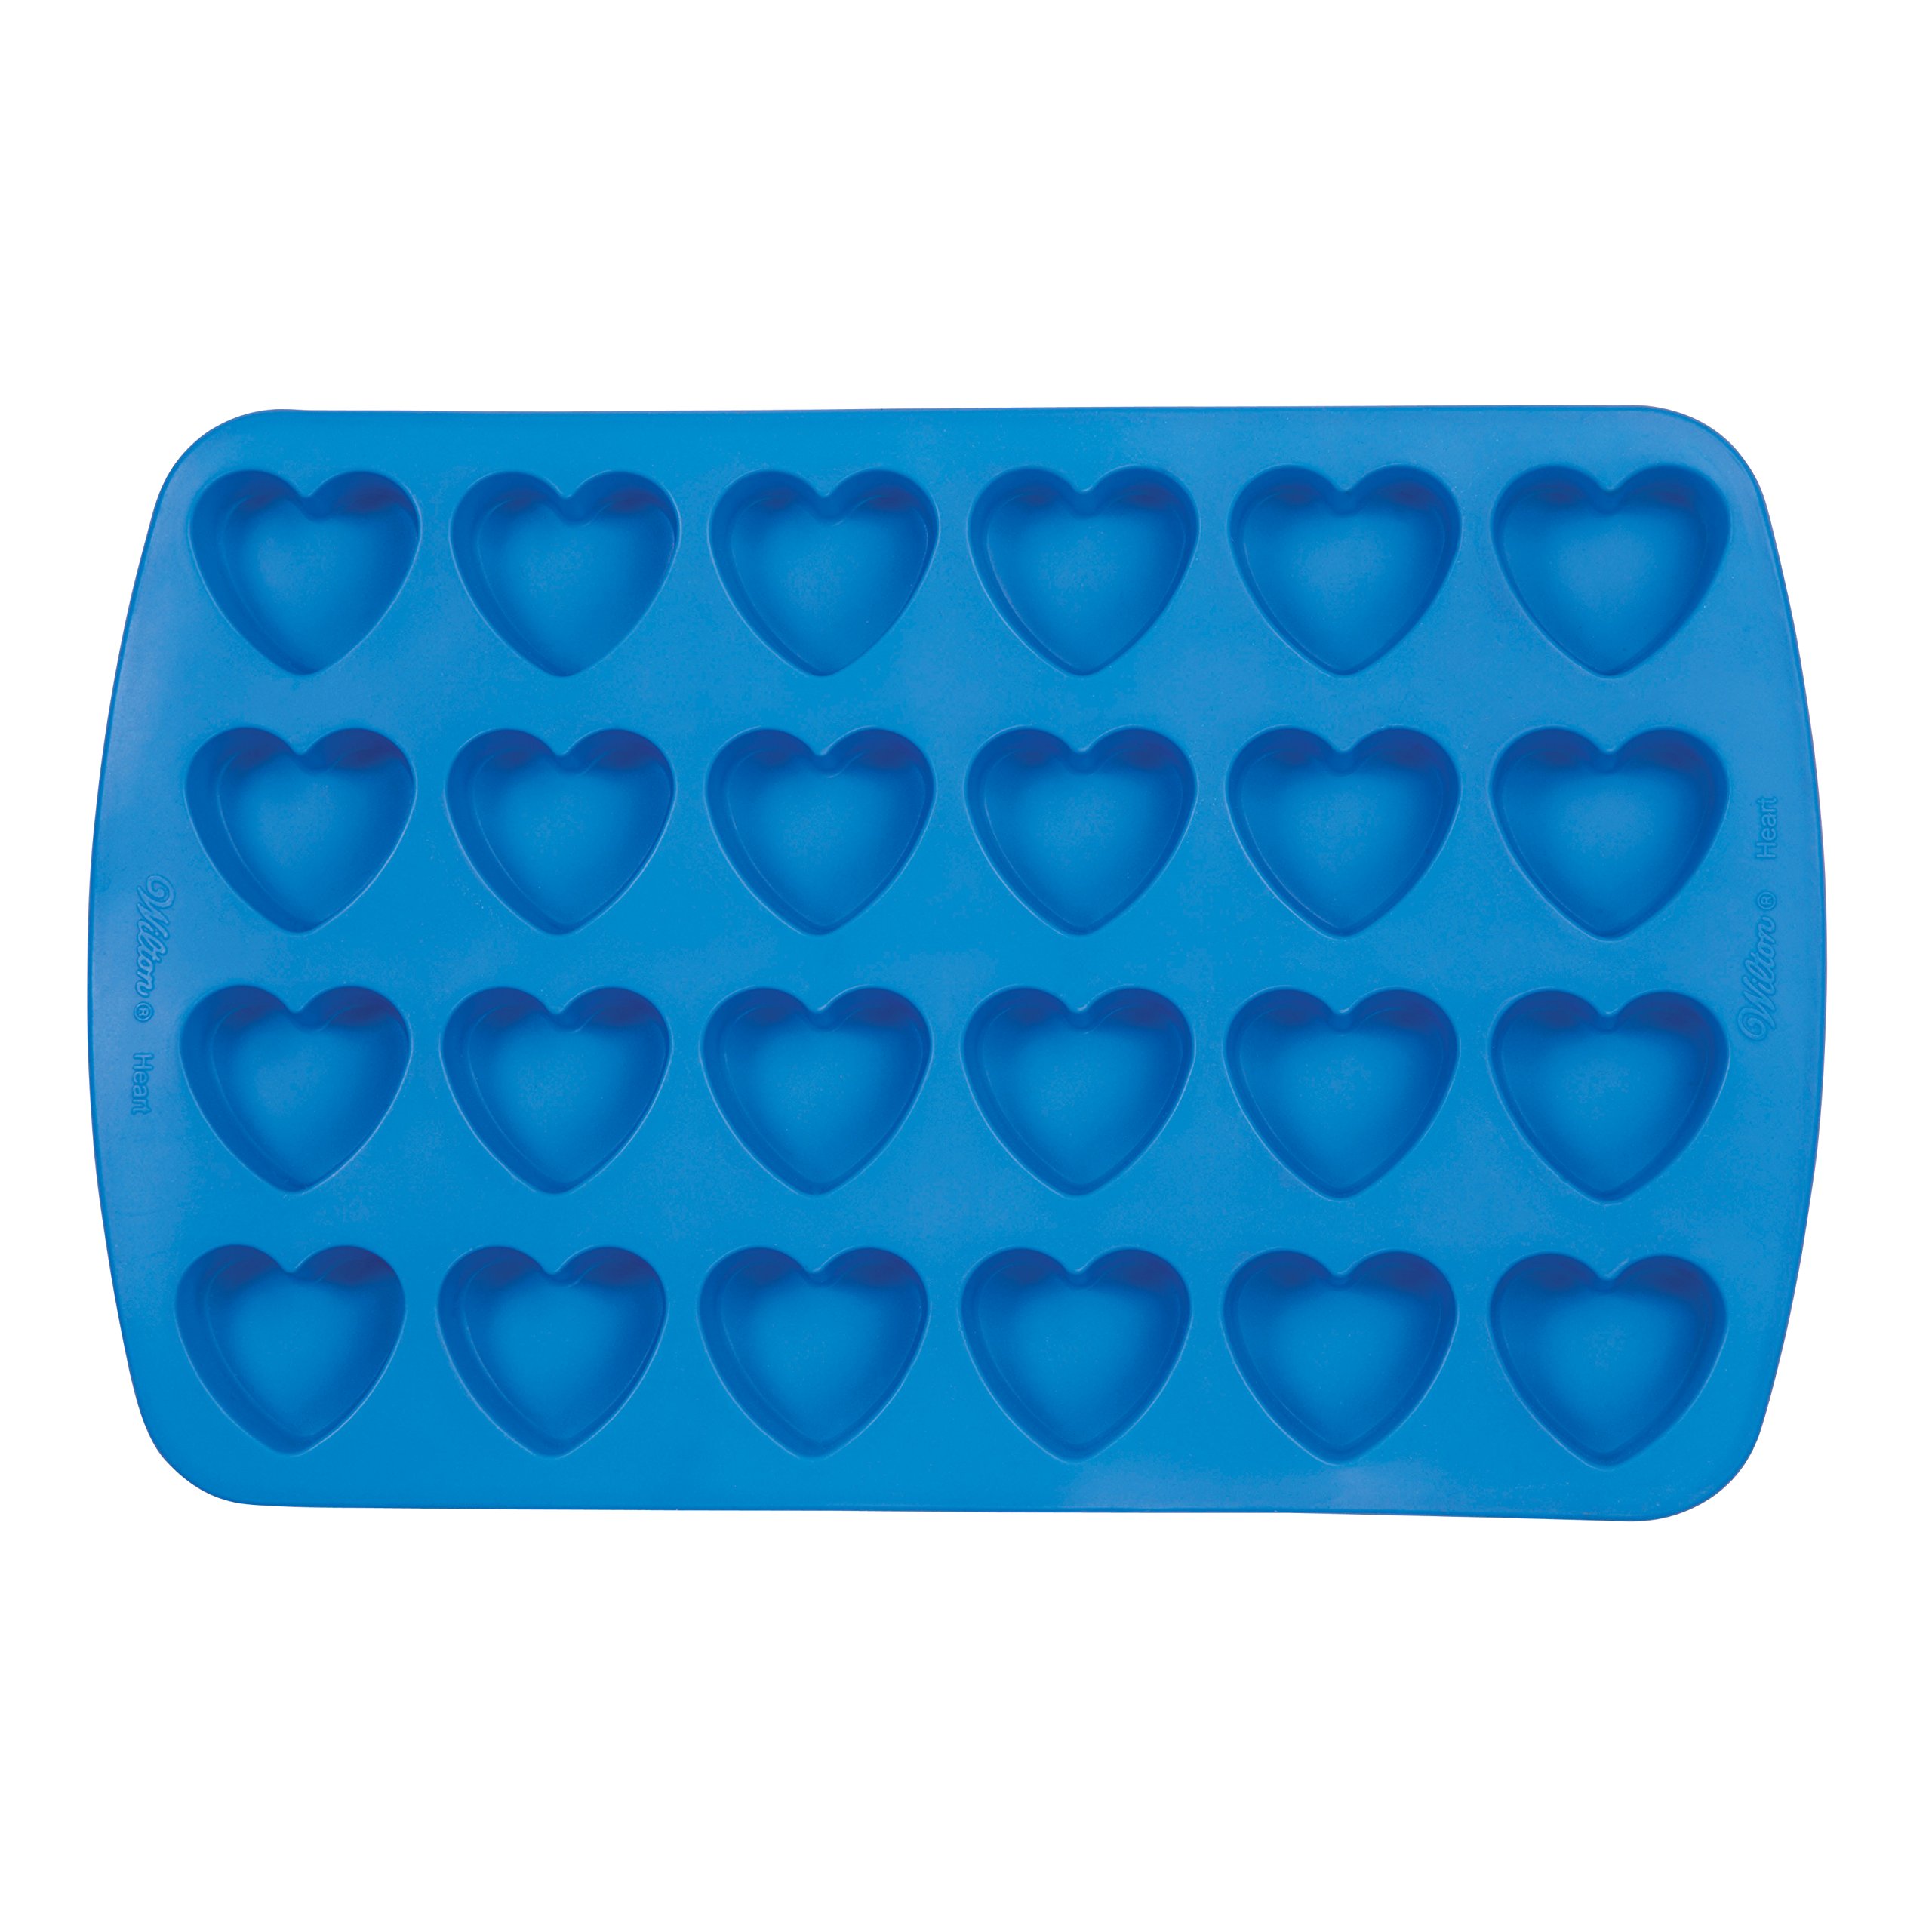 Wilton Easy-Flex Heart-Shaped Silicone Mold, 24-Cavity, Blue, for Ice Cubes, Gelatin, Baking and Candy, 13 x 10.5 in. (33 x 26.7 cm), Red